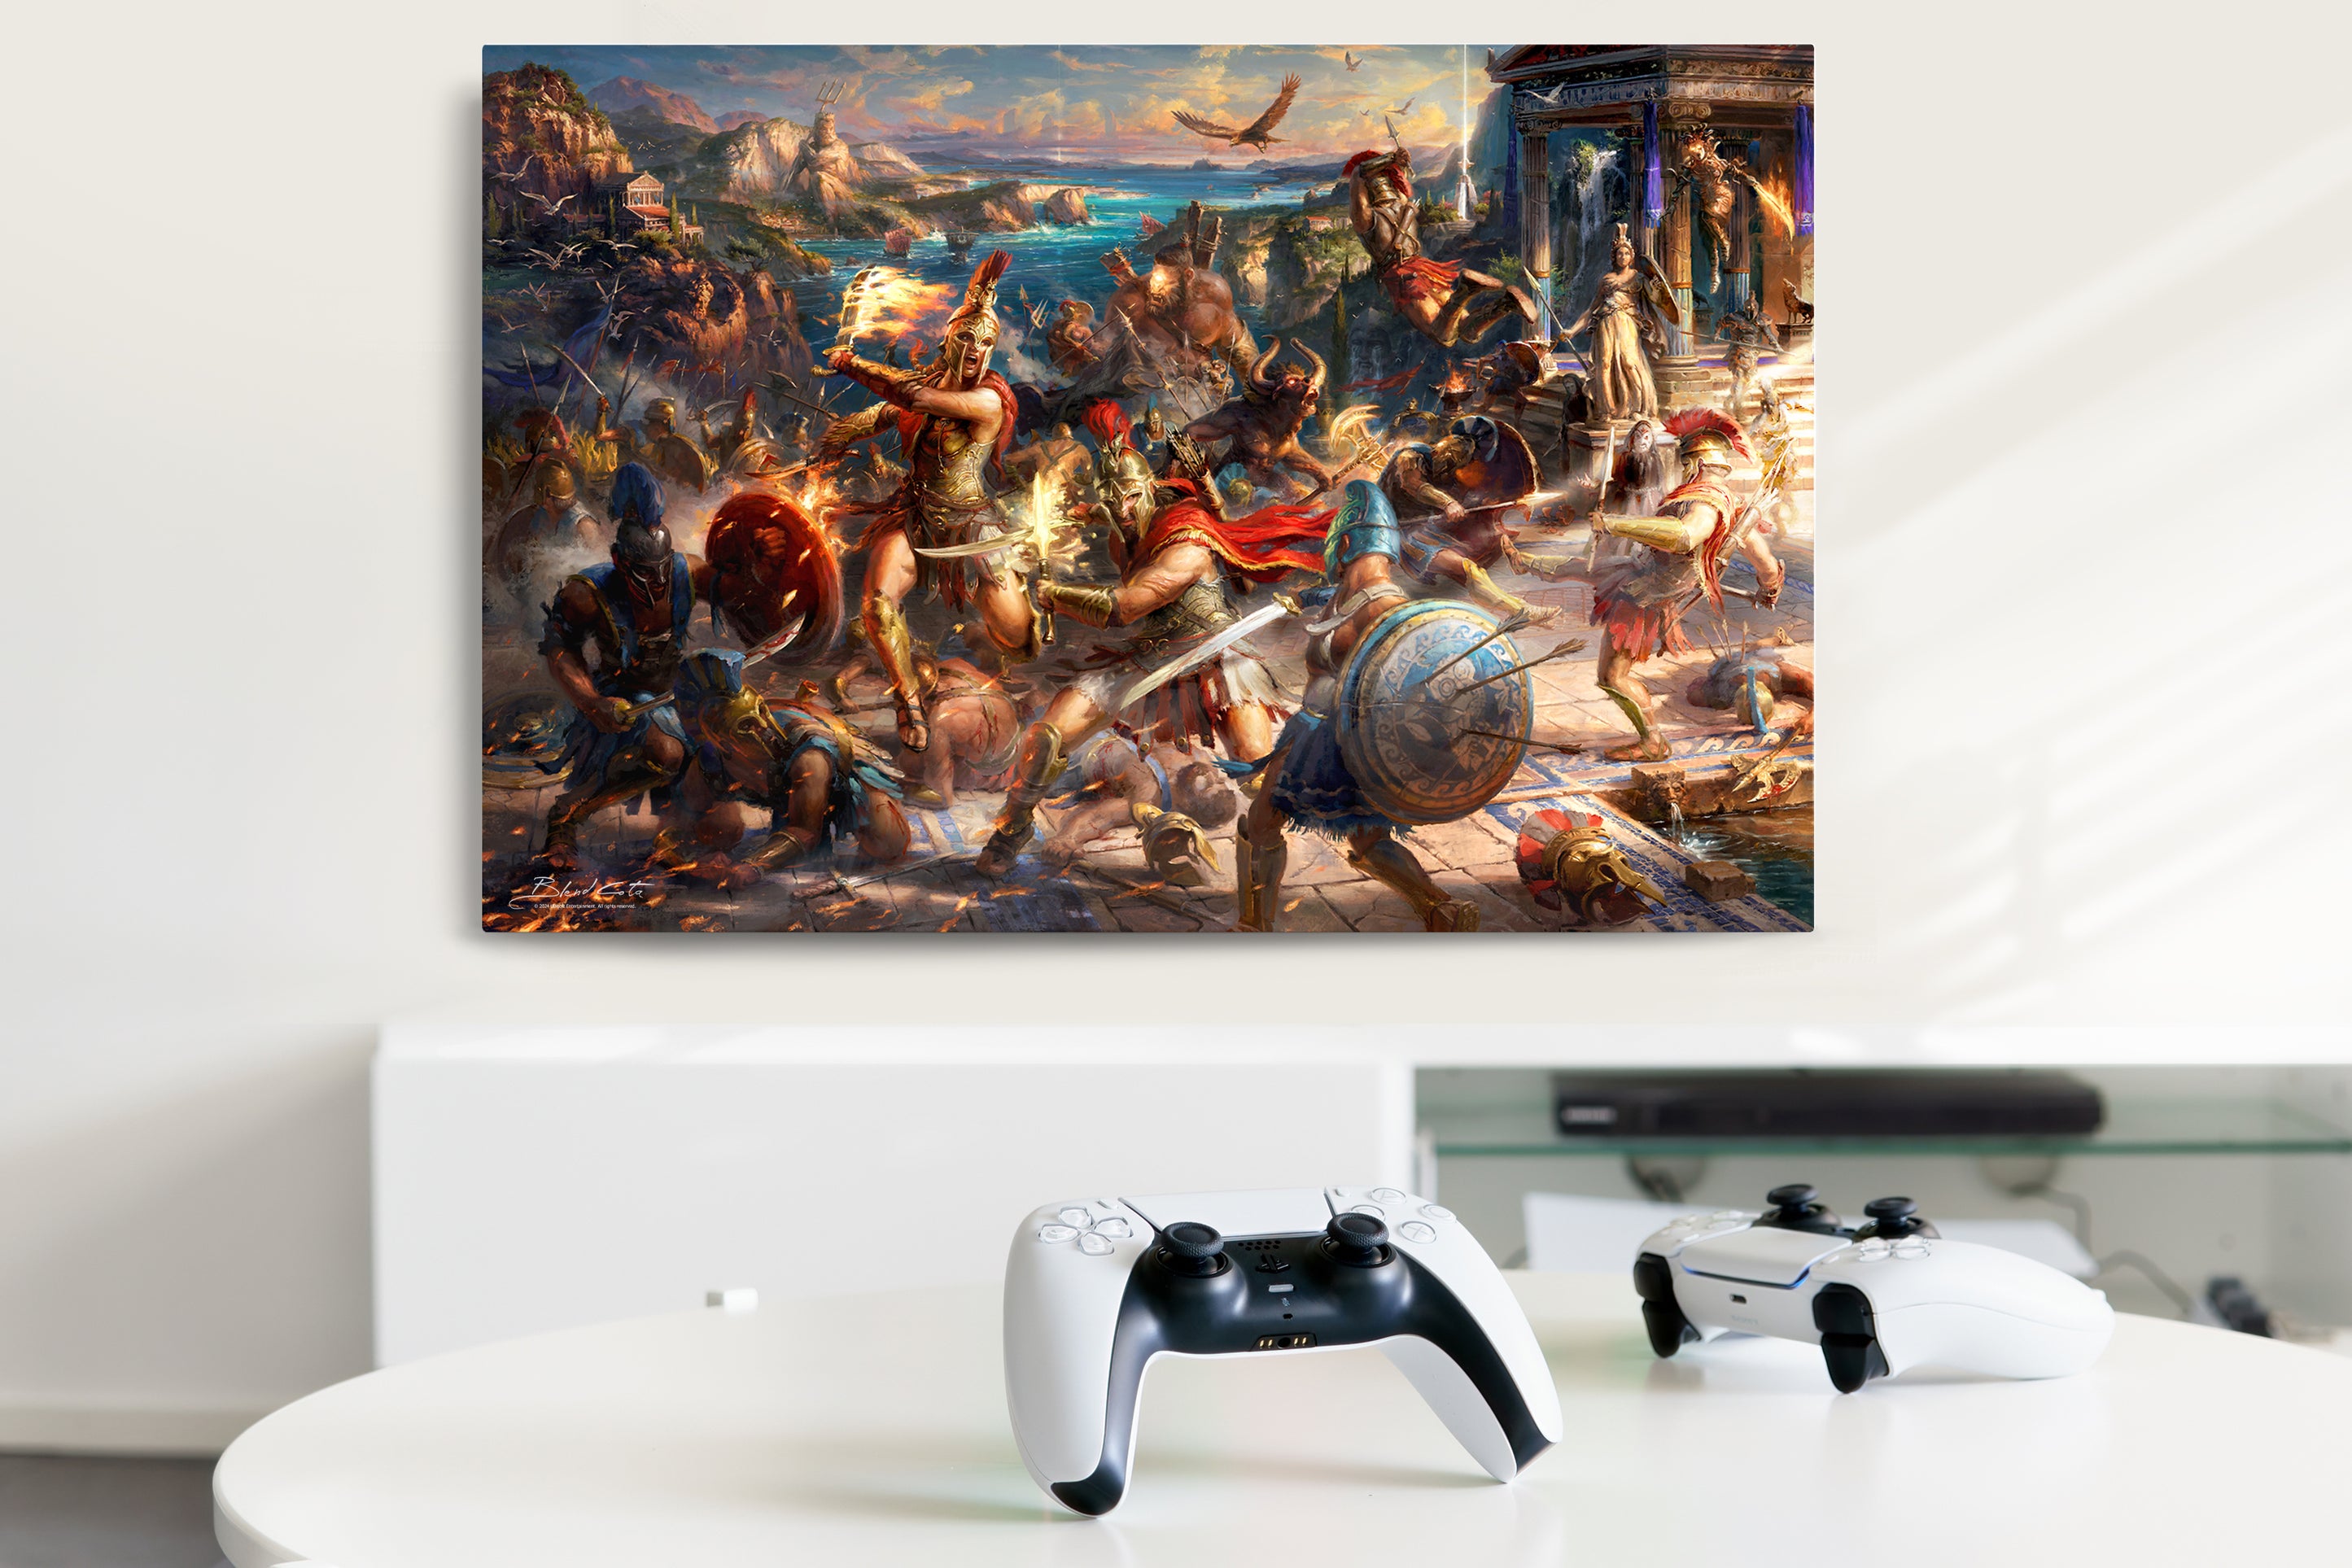 A battle of mythological creatures and Spartan warriors,  from Ubisoft's Assassin's Creed Odyssey with Kassandra and Alexios fighting by a temple in this limited edition painting printed on metal pictured in a room setting with sunlight shining.